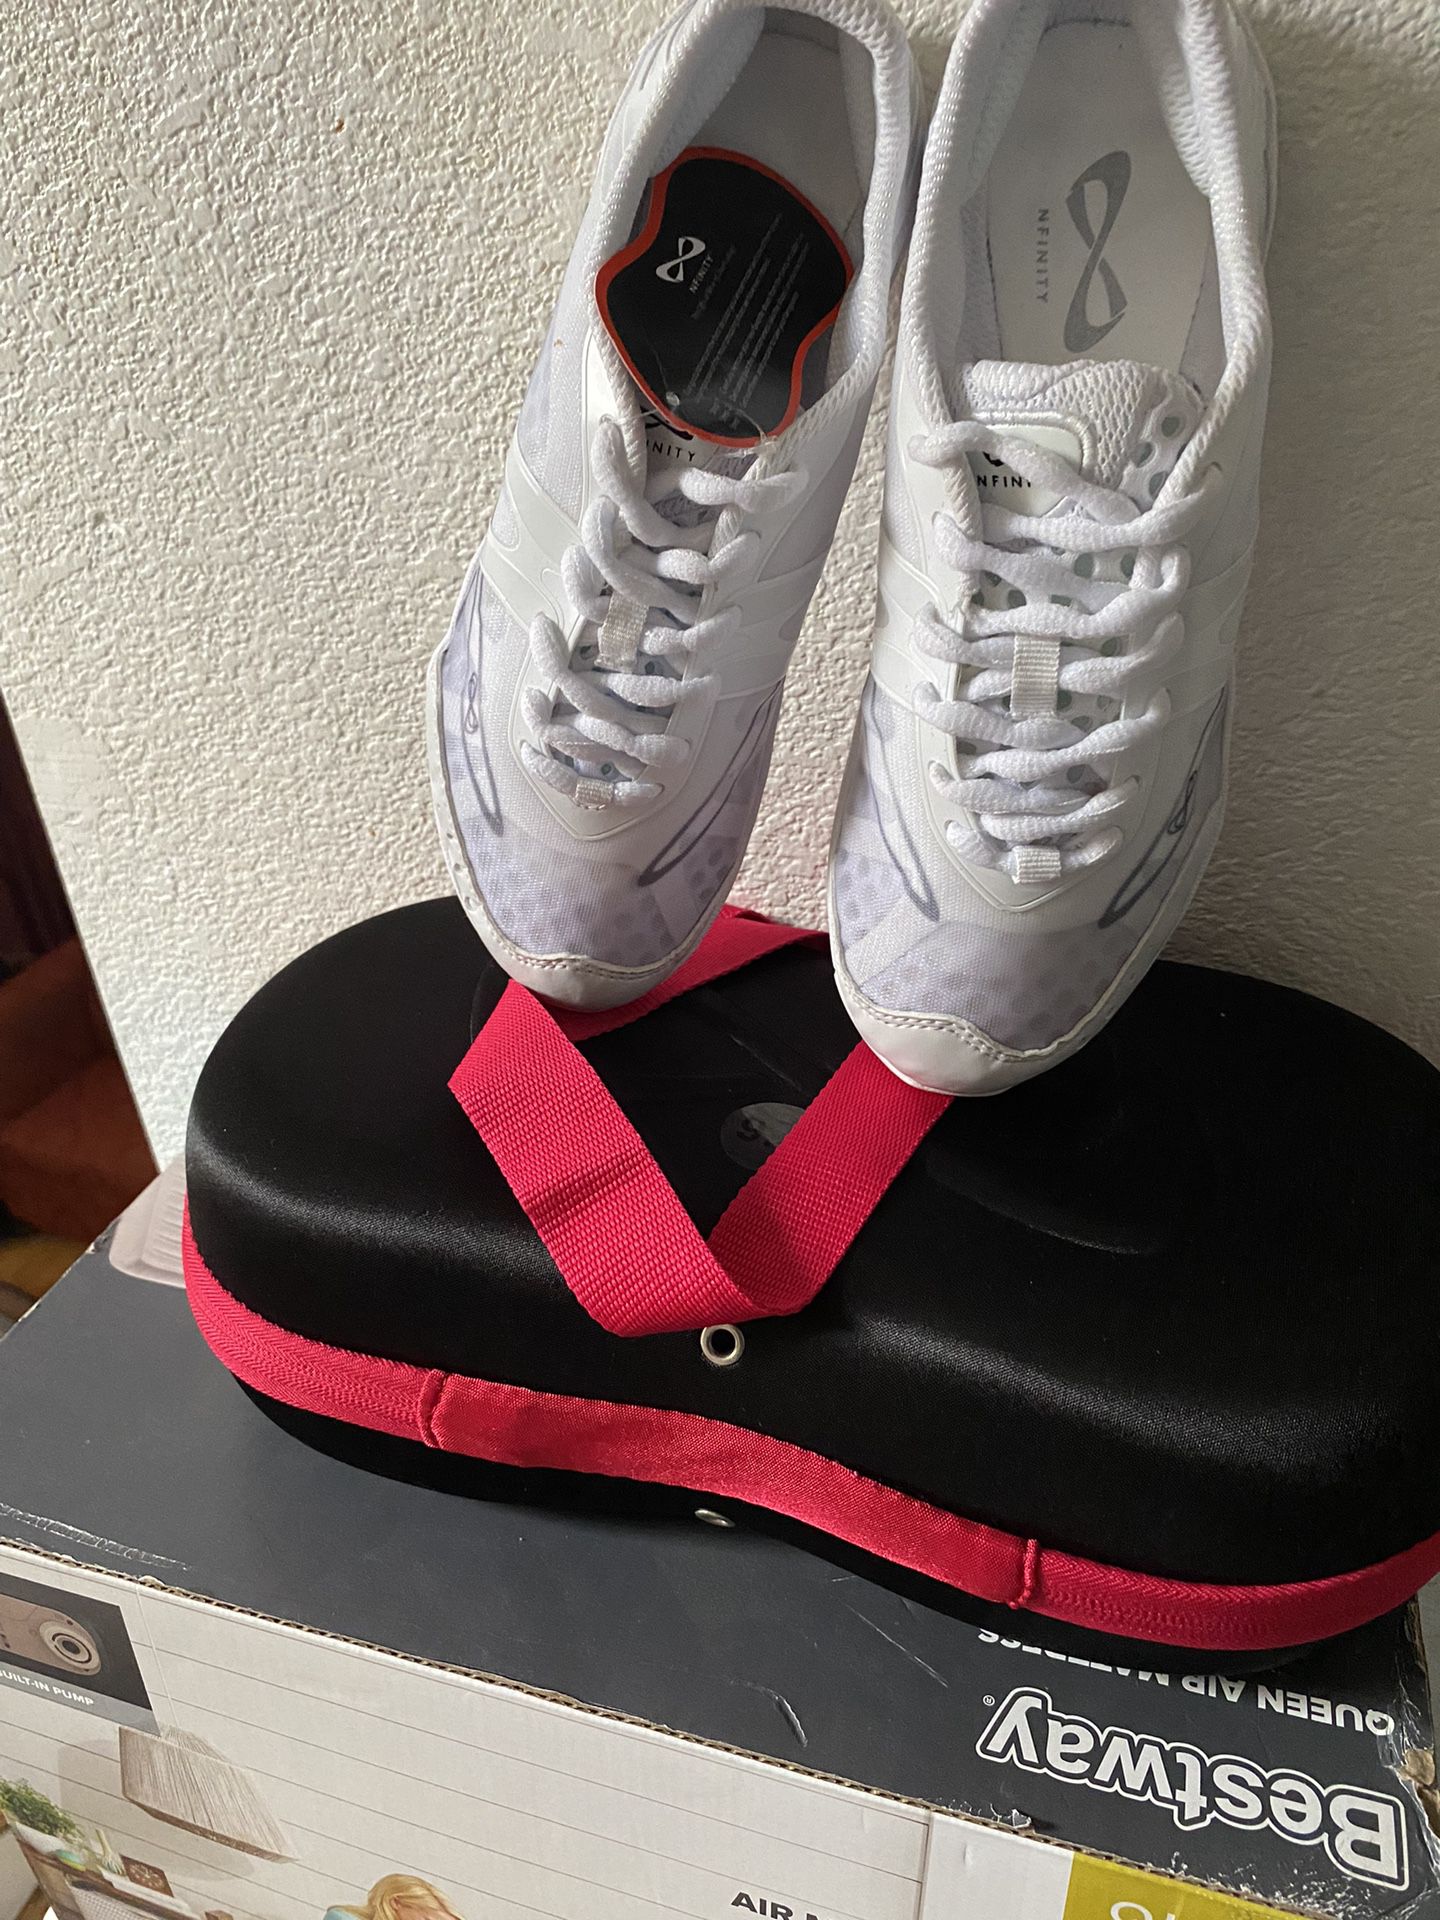 NFINITY SHOES AND CASE  $25  SIZE 6 